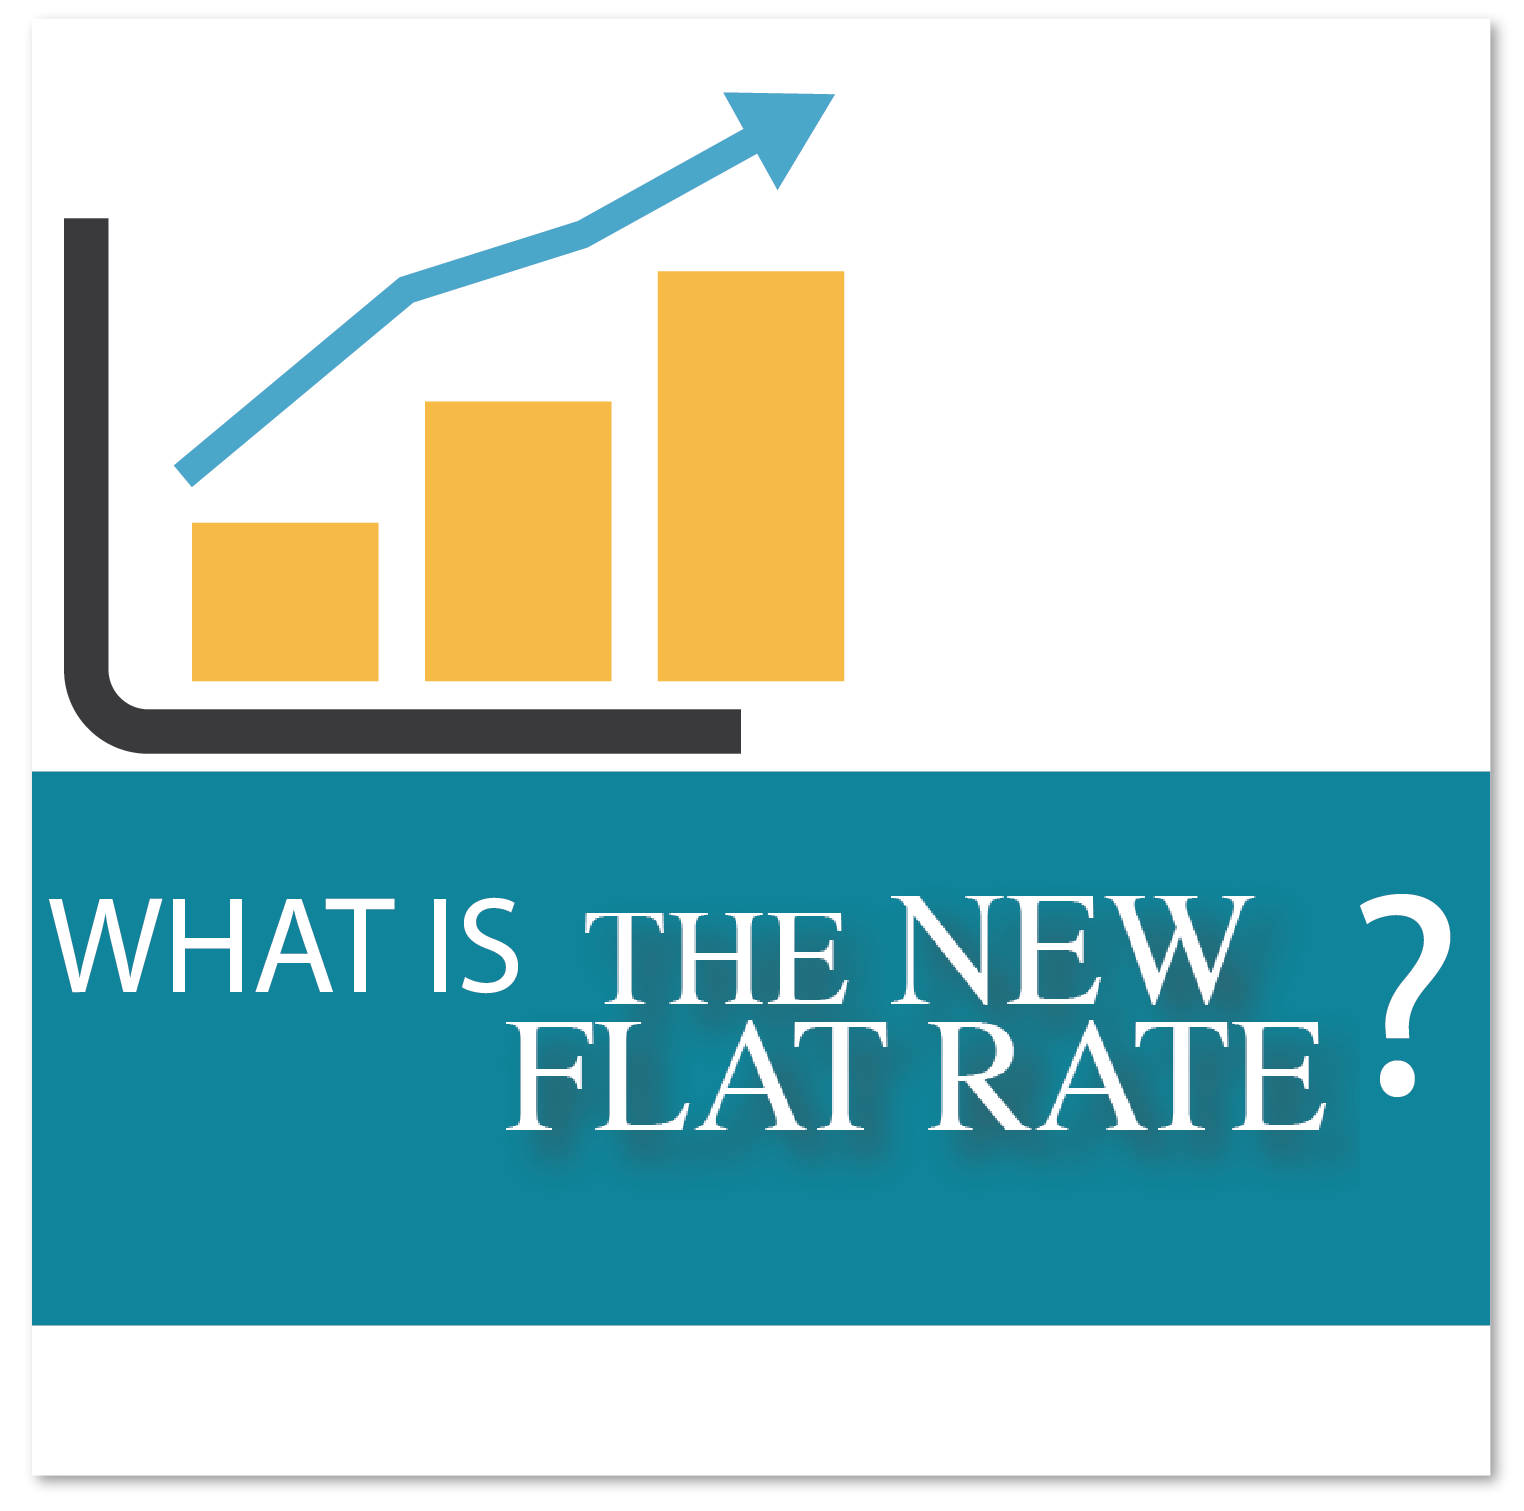 The New Flat Rate is a menu pricing system that allows HVAC, electrical, and plumbing technicians to not have to sell.Plumbing Price Book, HVAC Flat Rate Plumbing, Flat Rate, HVAC price Book, Electrical Price Book, Electrical Flat Rate